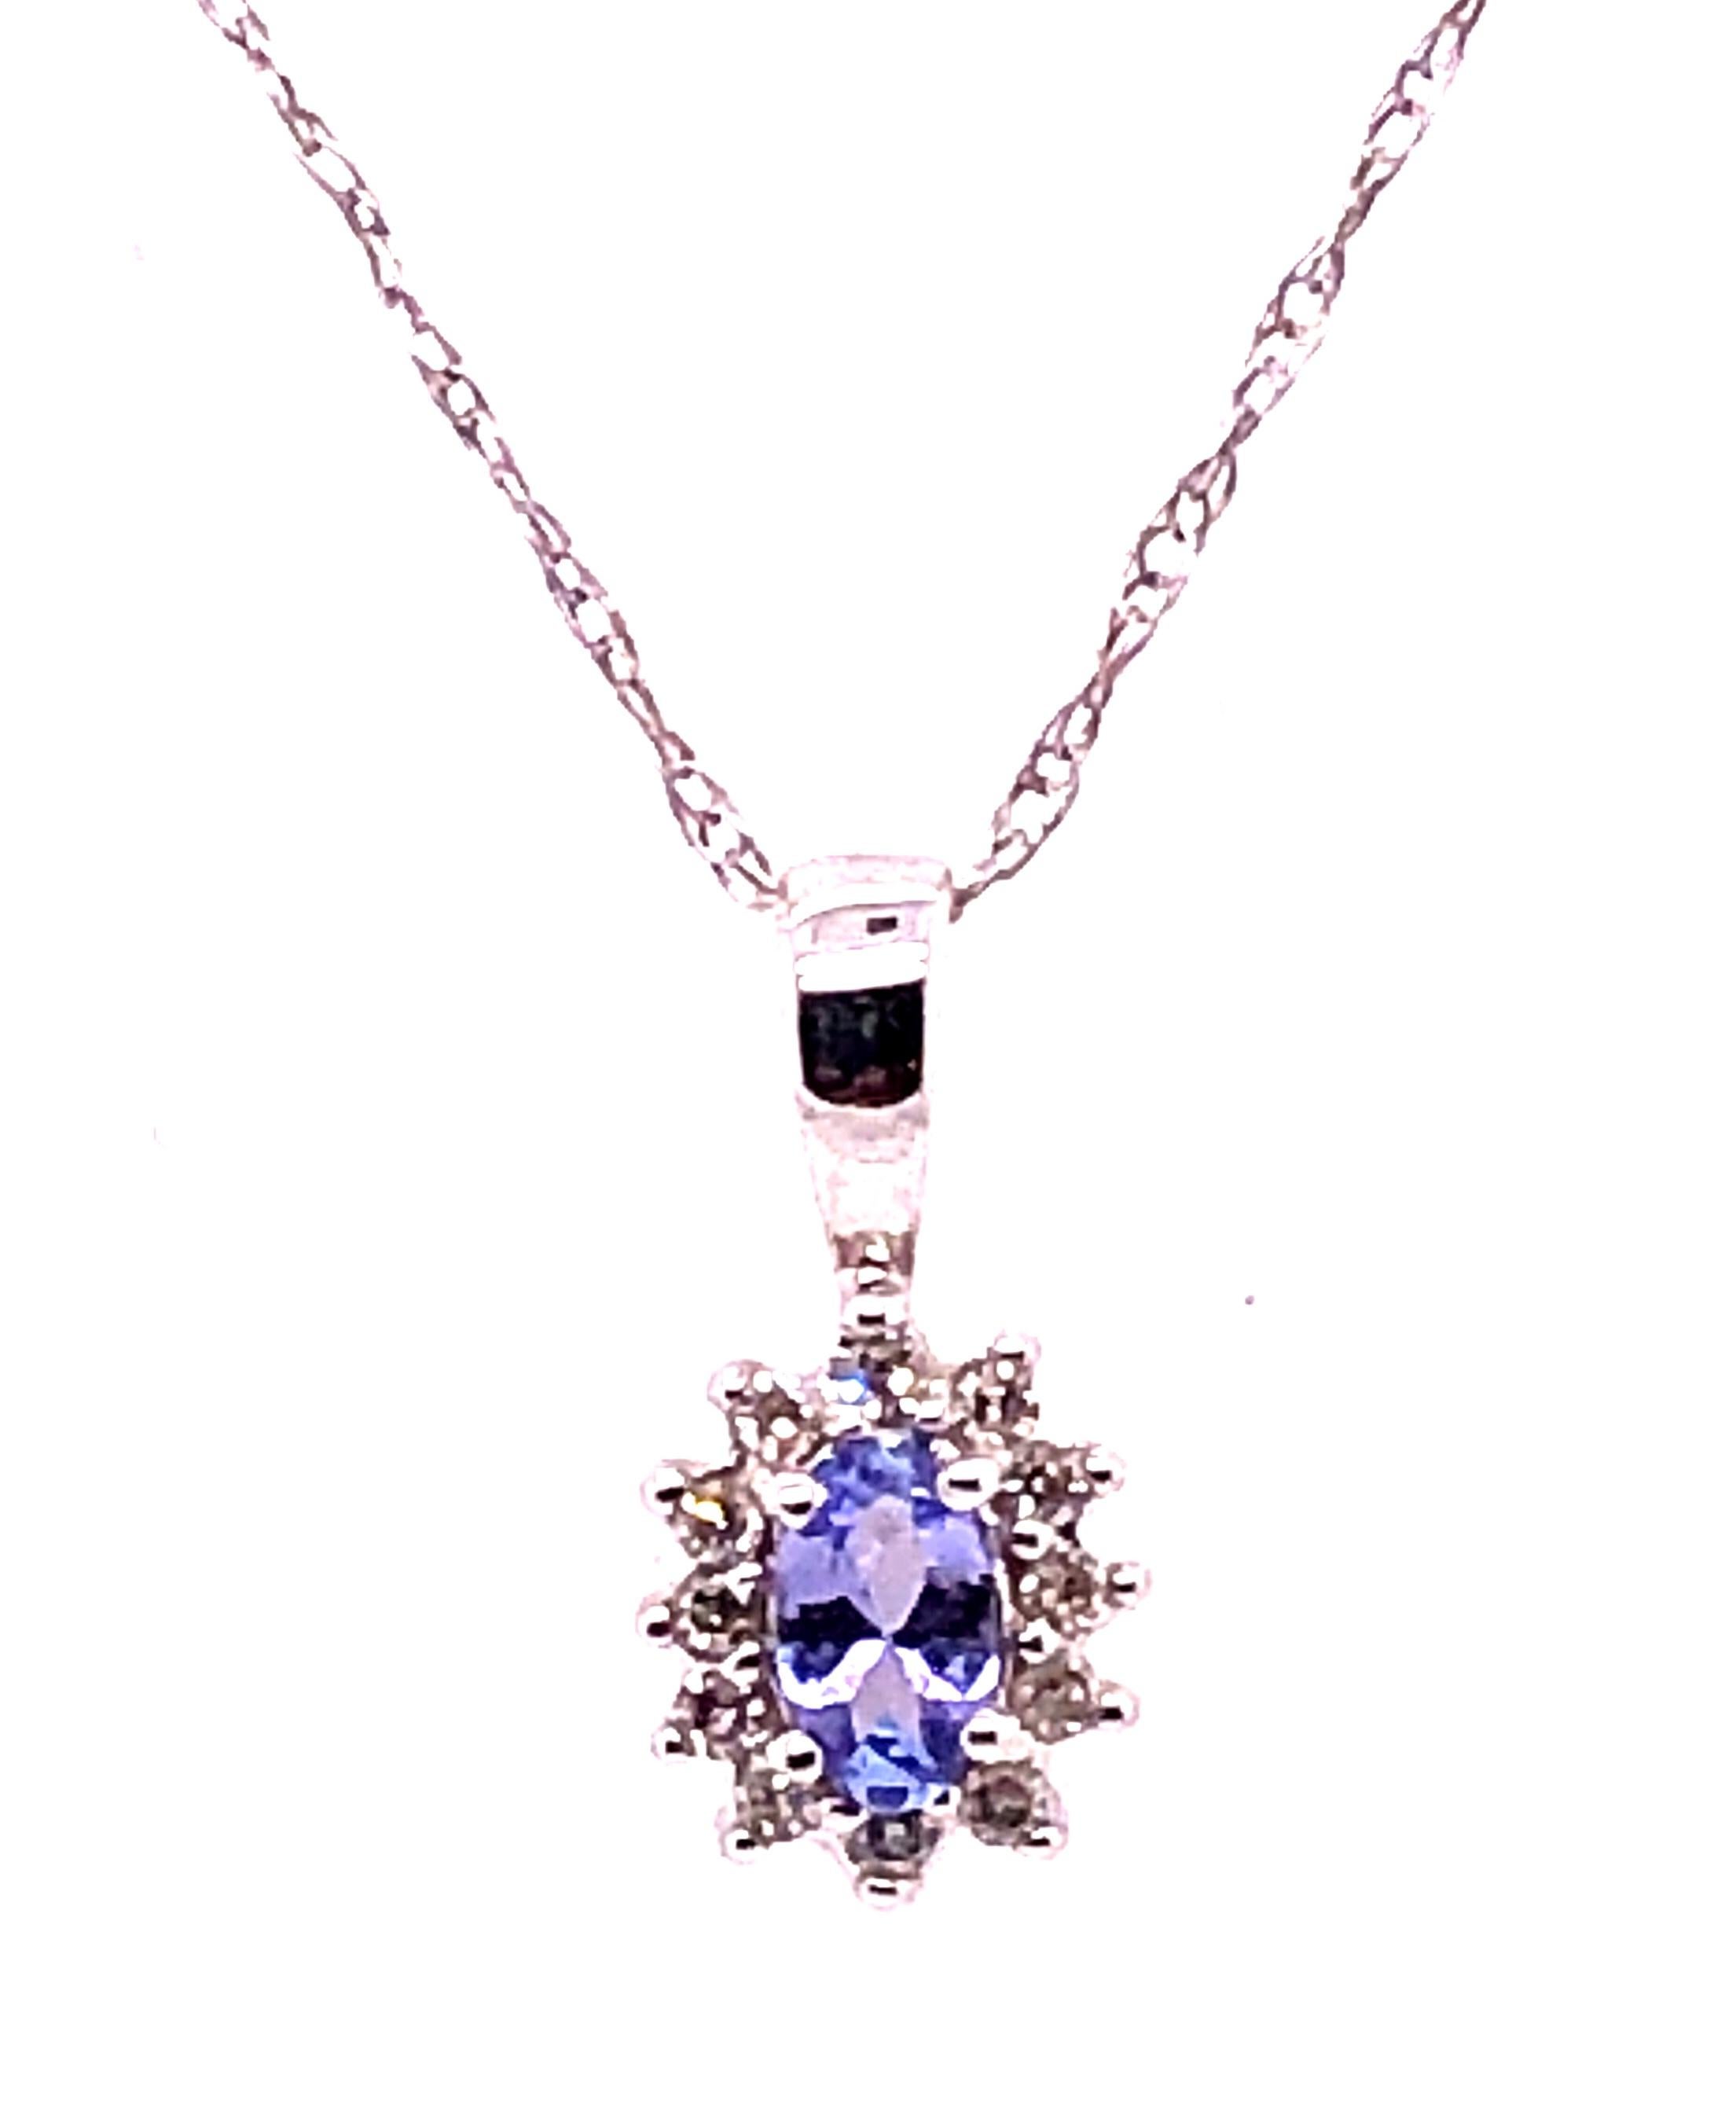 14 Karat White Gold 16 Inch Necklace with Diamonds and Oval Tanzanite Pendant.
2.33 grams total weight.
Pendant and Chain both stamped 14K.